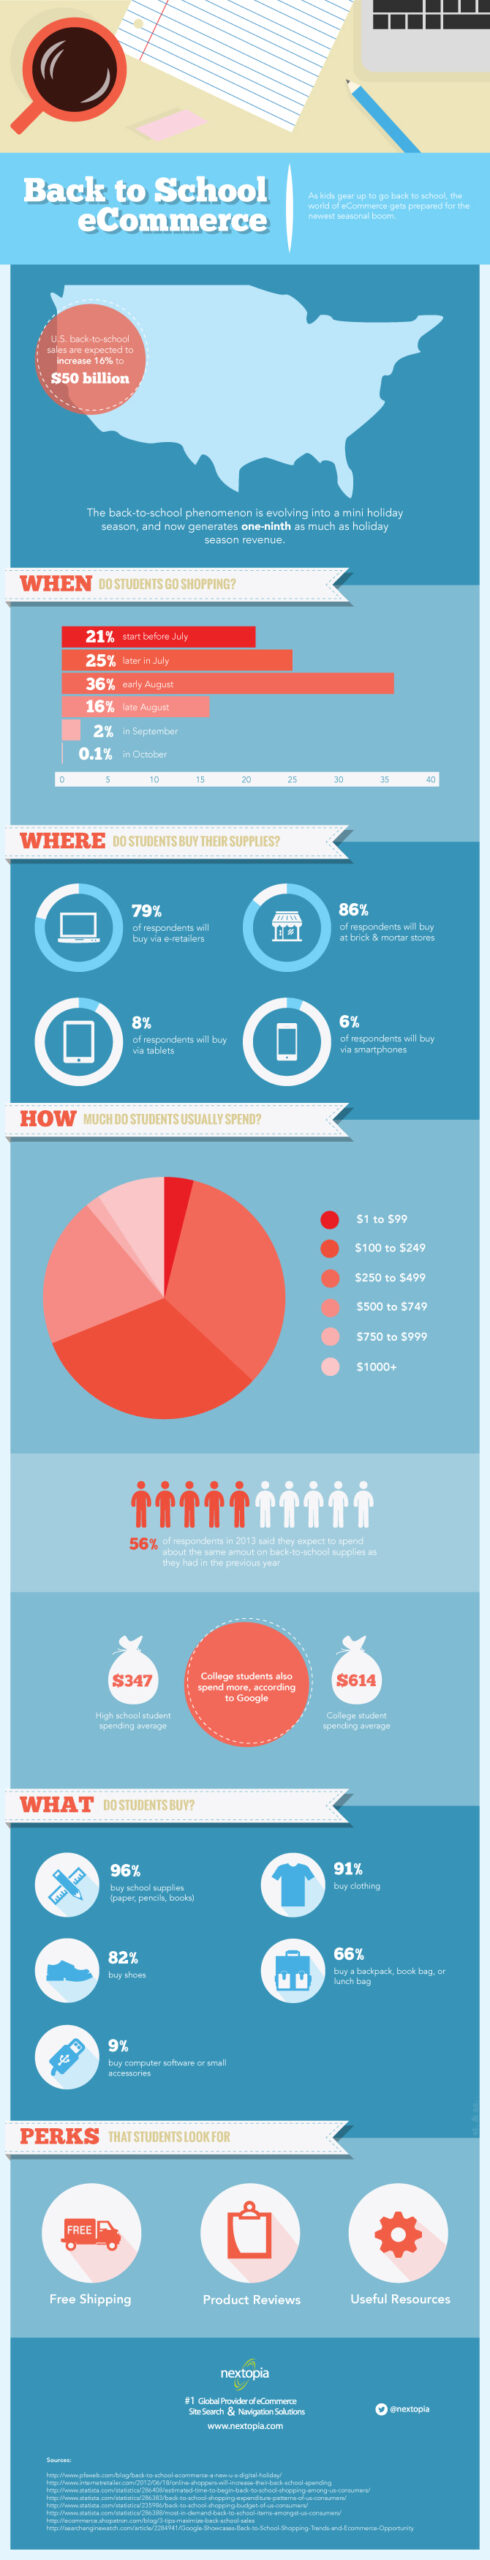 Back-To-School-Ecommerce-Stats-Infographic-2014